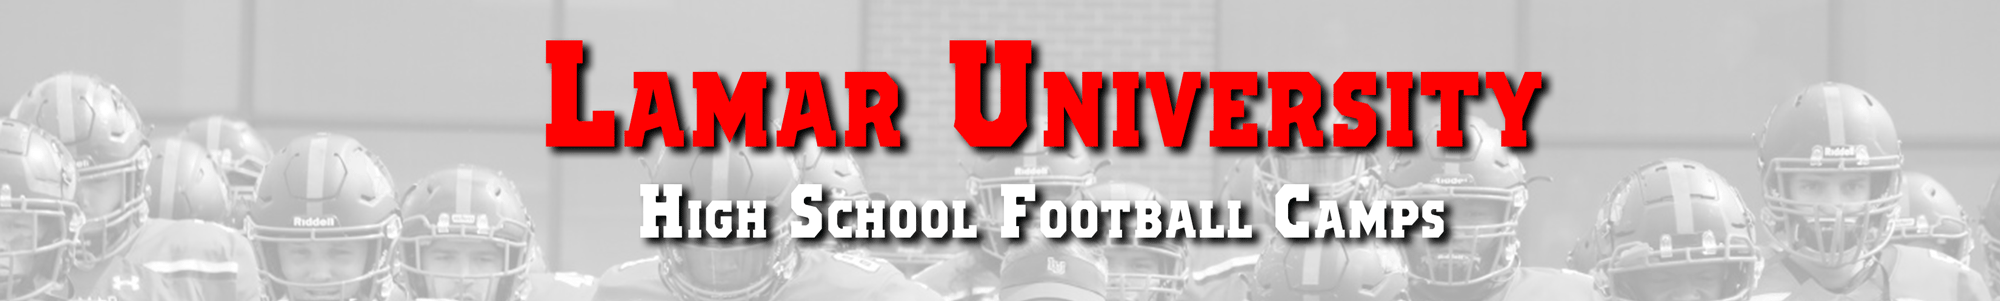 Lamar University High School Football Camps, black and white watermark background of football team head and shoulders only